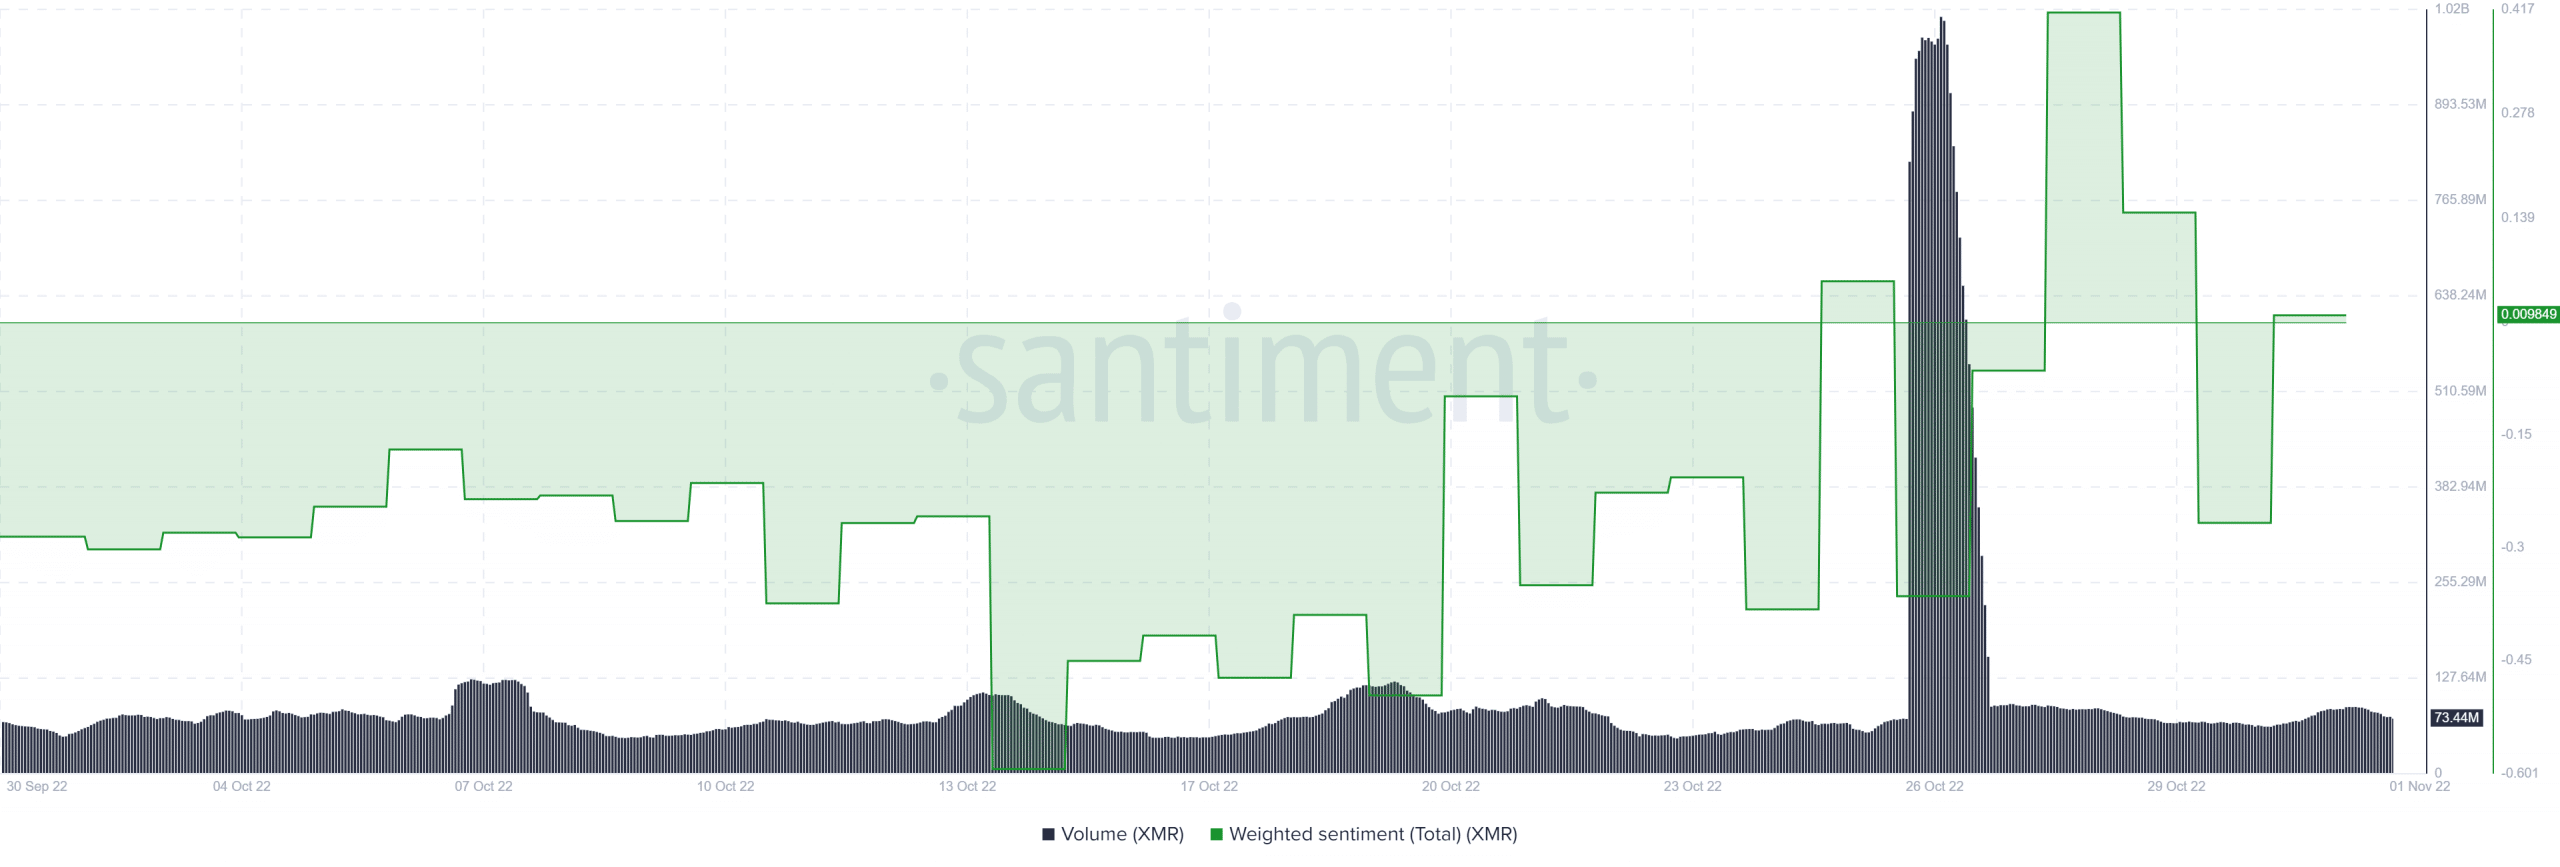 XMR volume and weighted sentiment